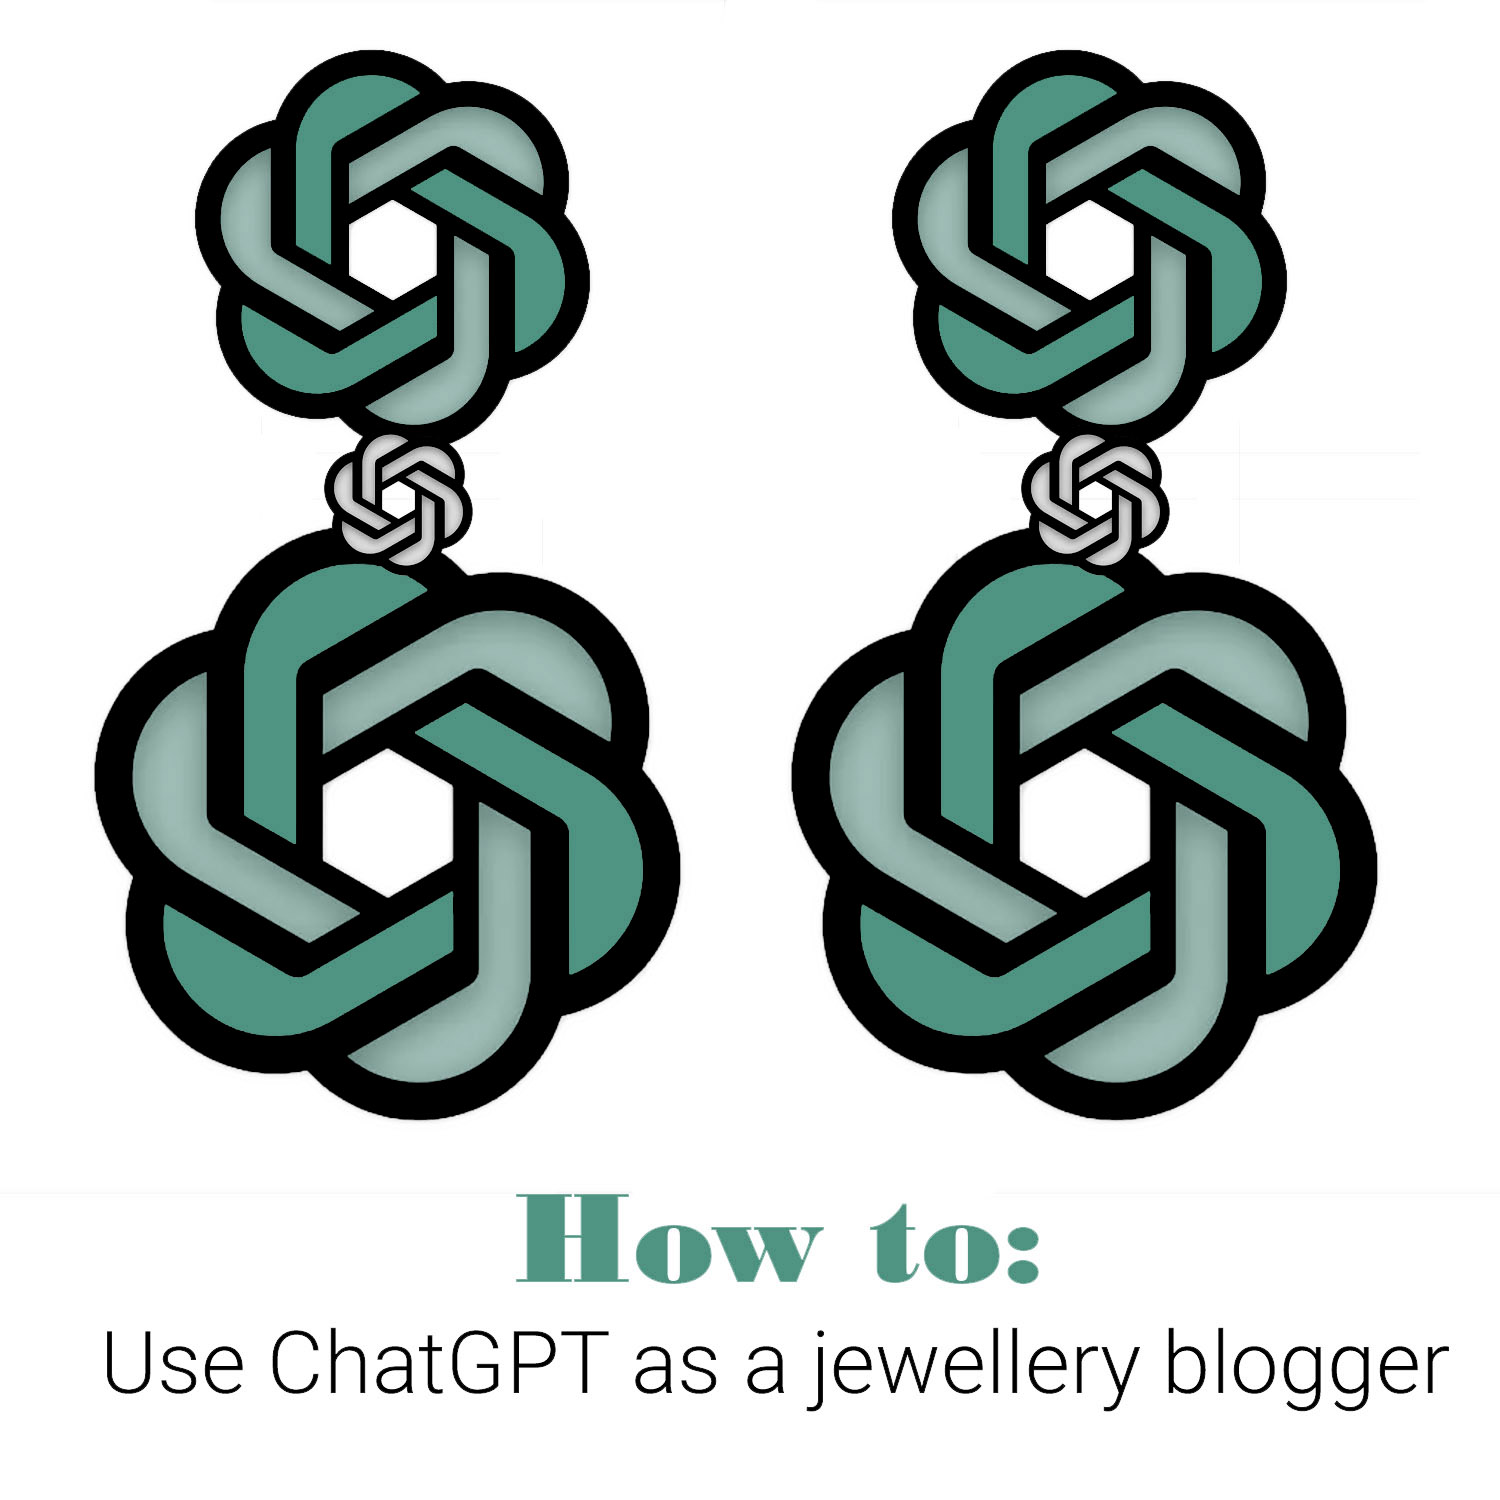 how to Use ChatGPT as a jewellery blogger